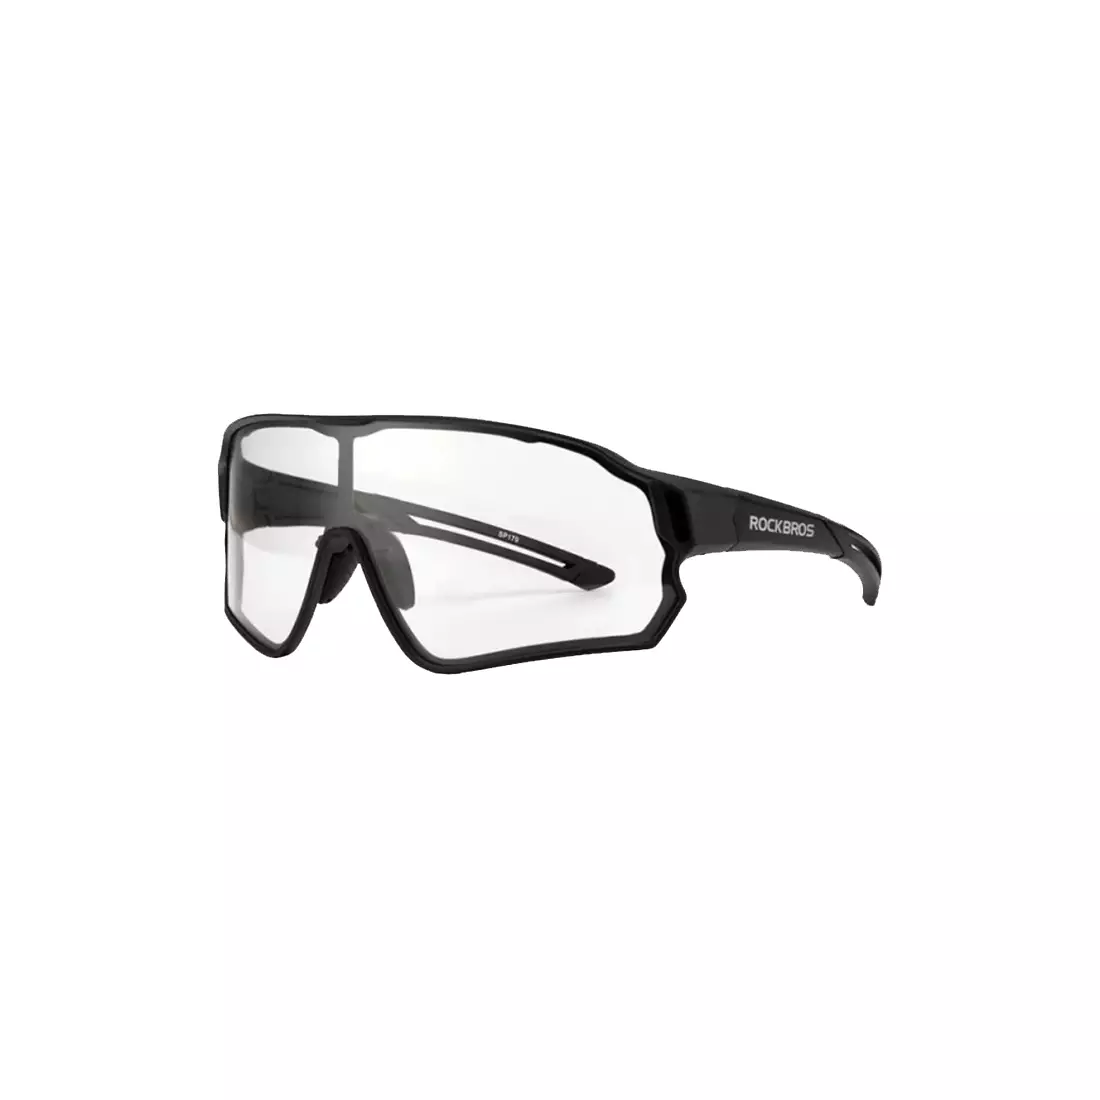 Rockbros 10139 bicycle / sports glasses with photochrome black